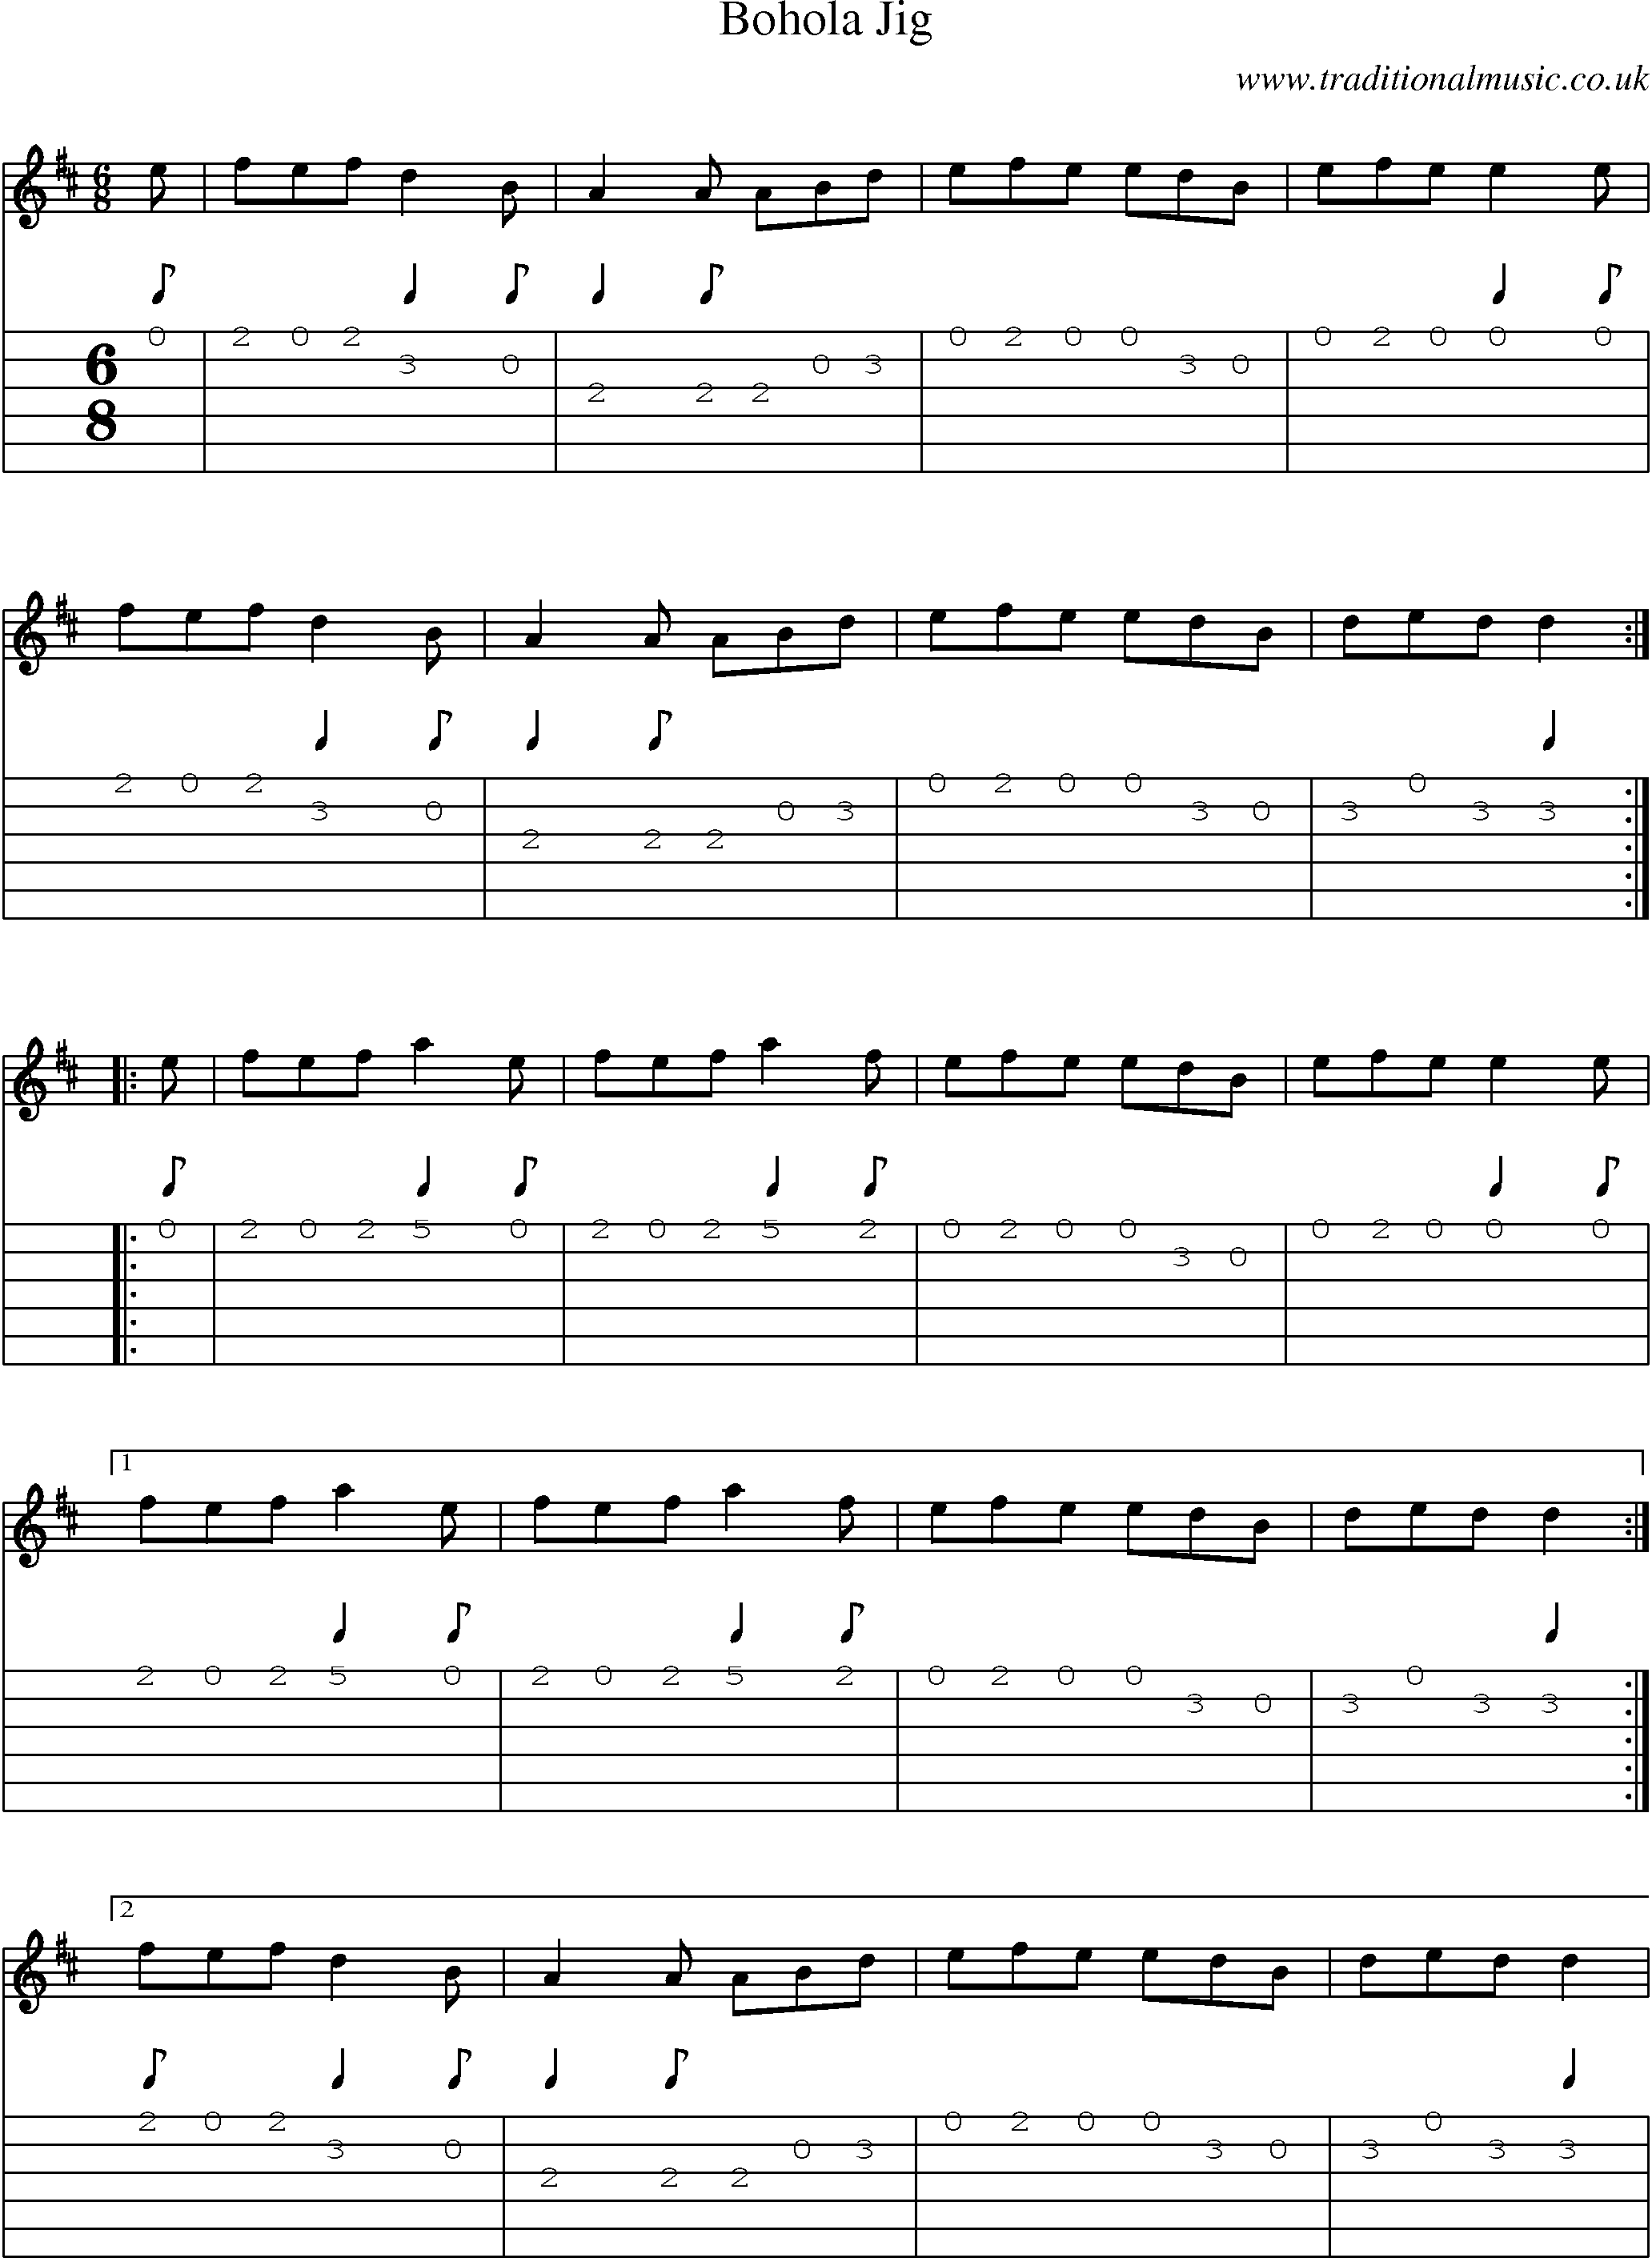 Music Score and Guitar Tabs for Bohola Jig